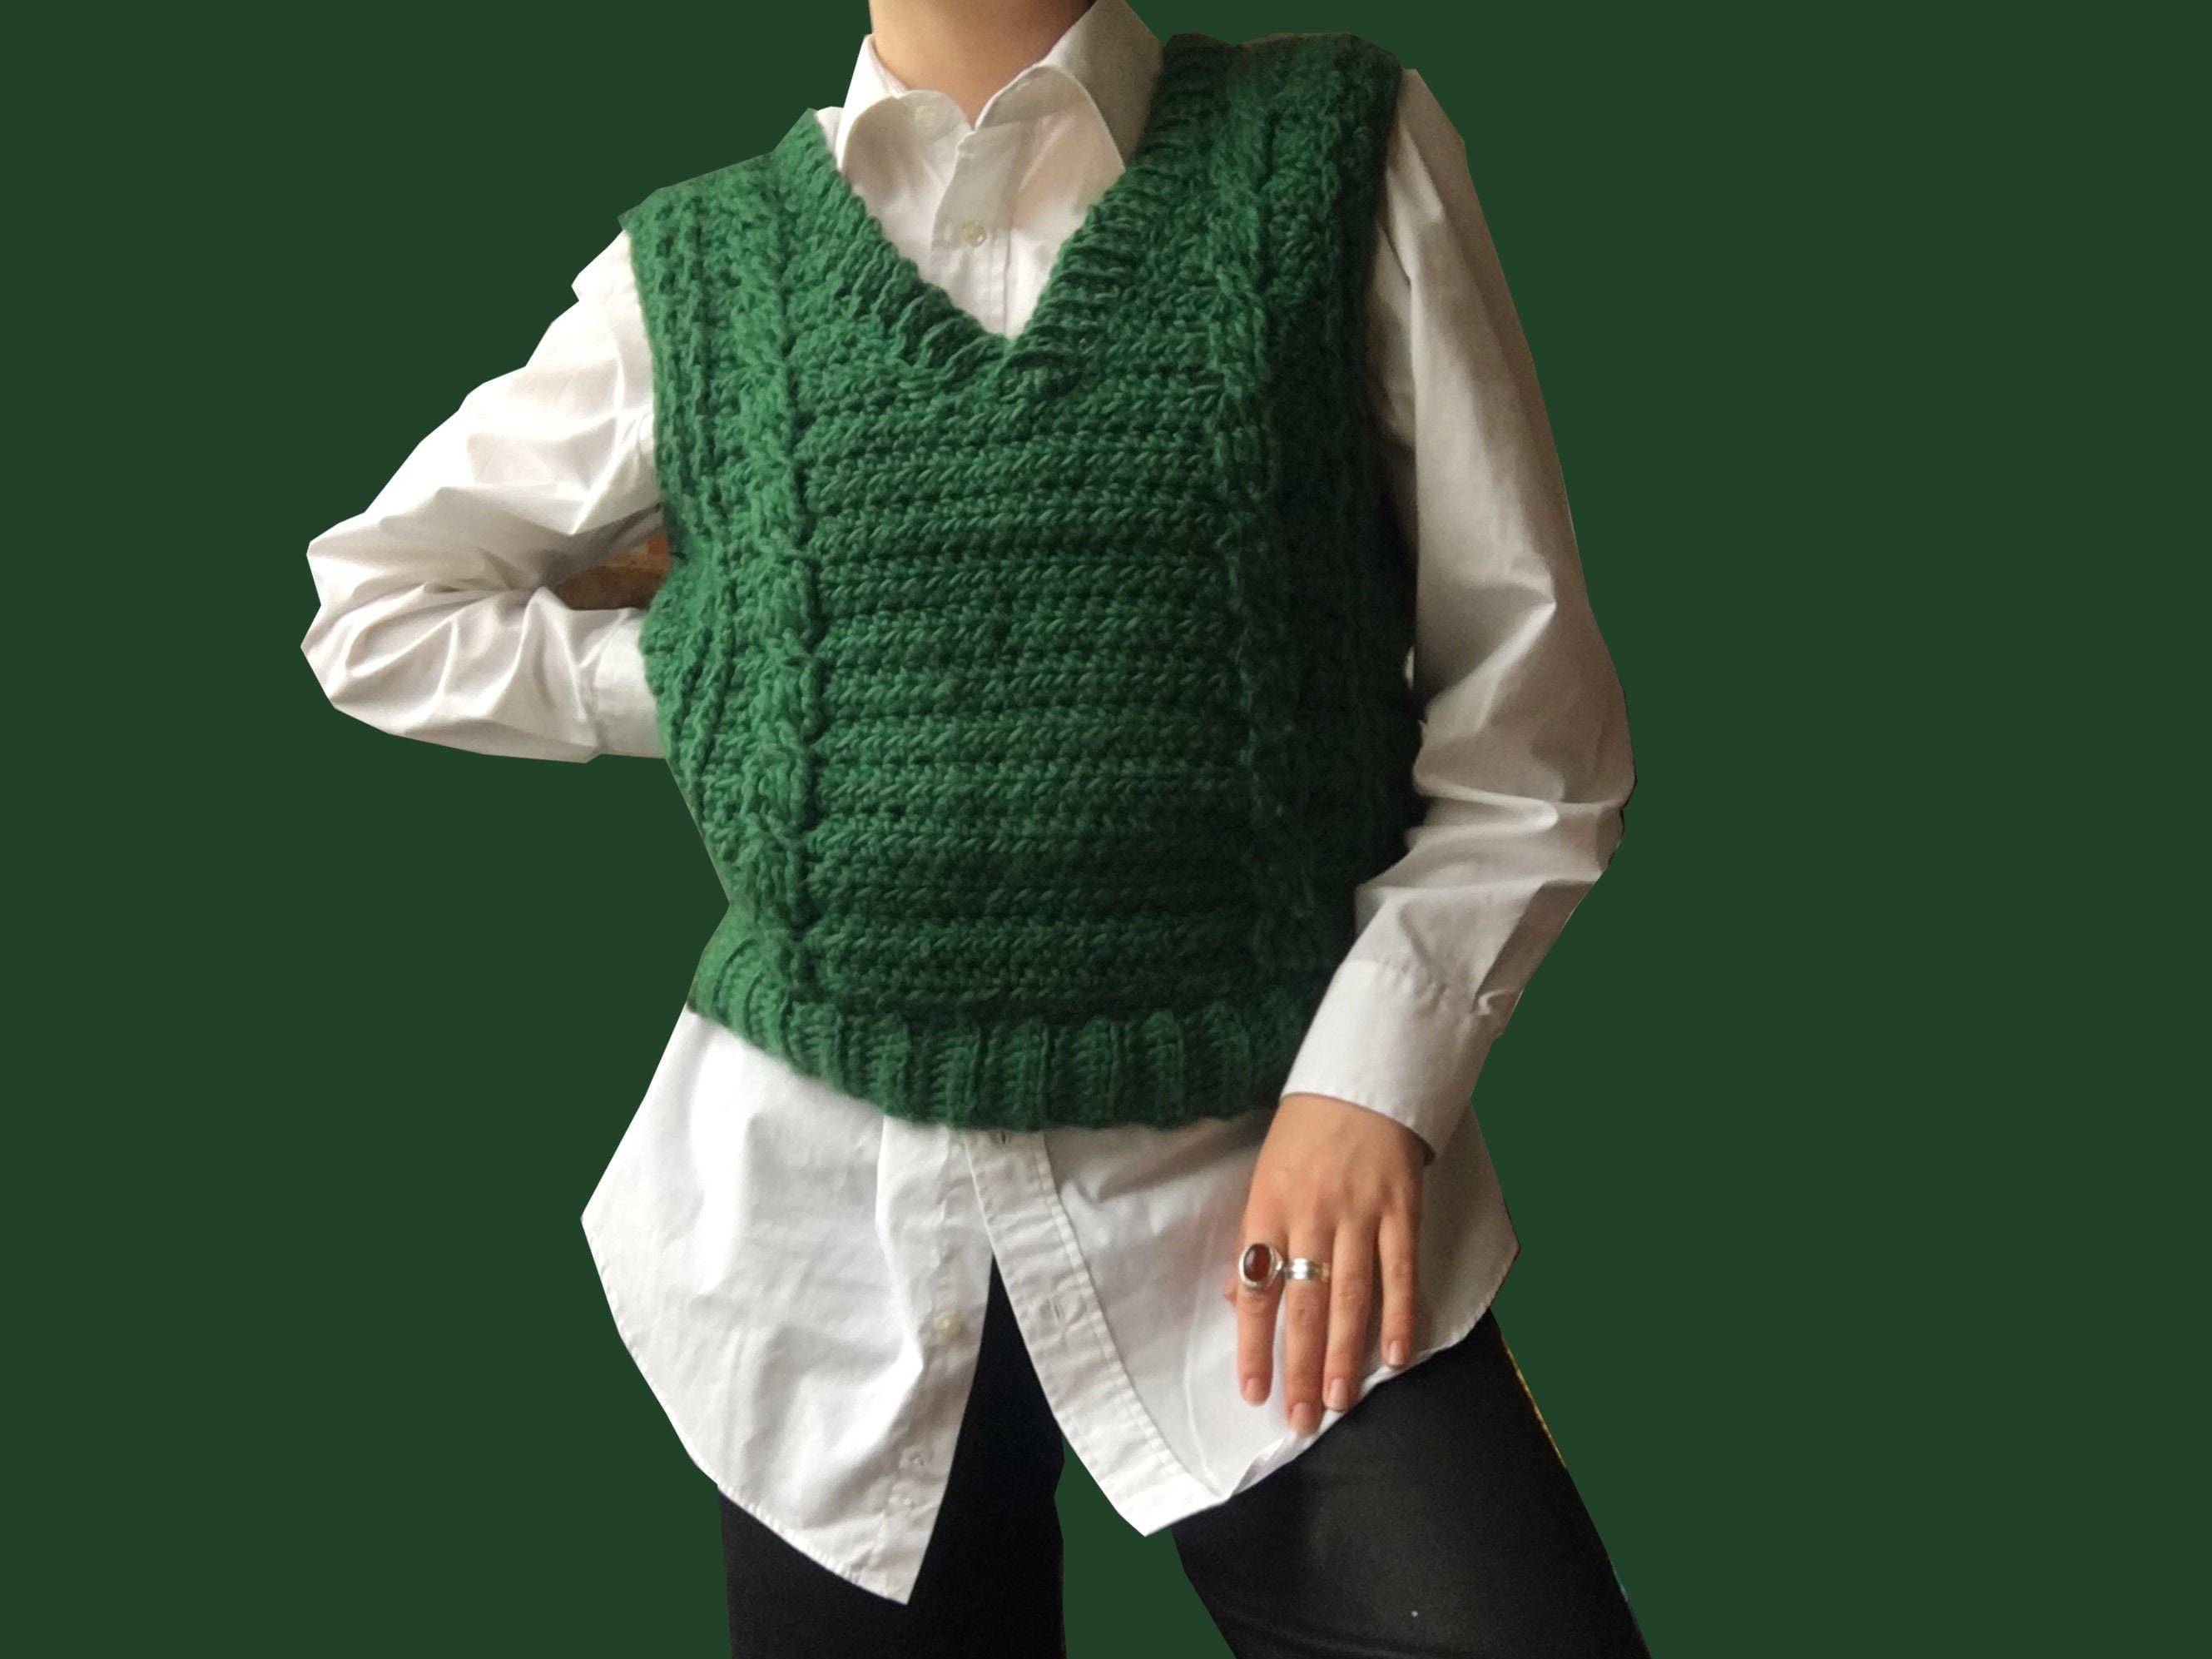 Stacked Sweater Vest - Unisex Sweaters & Knits